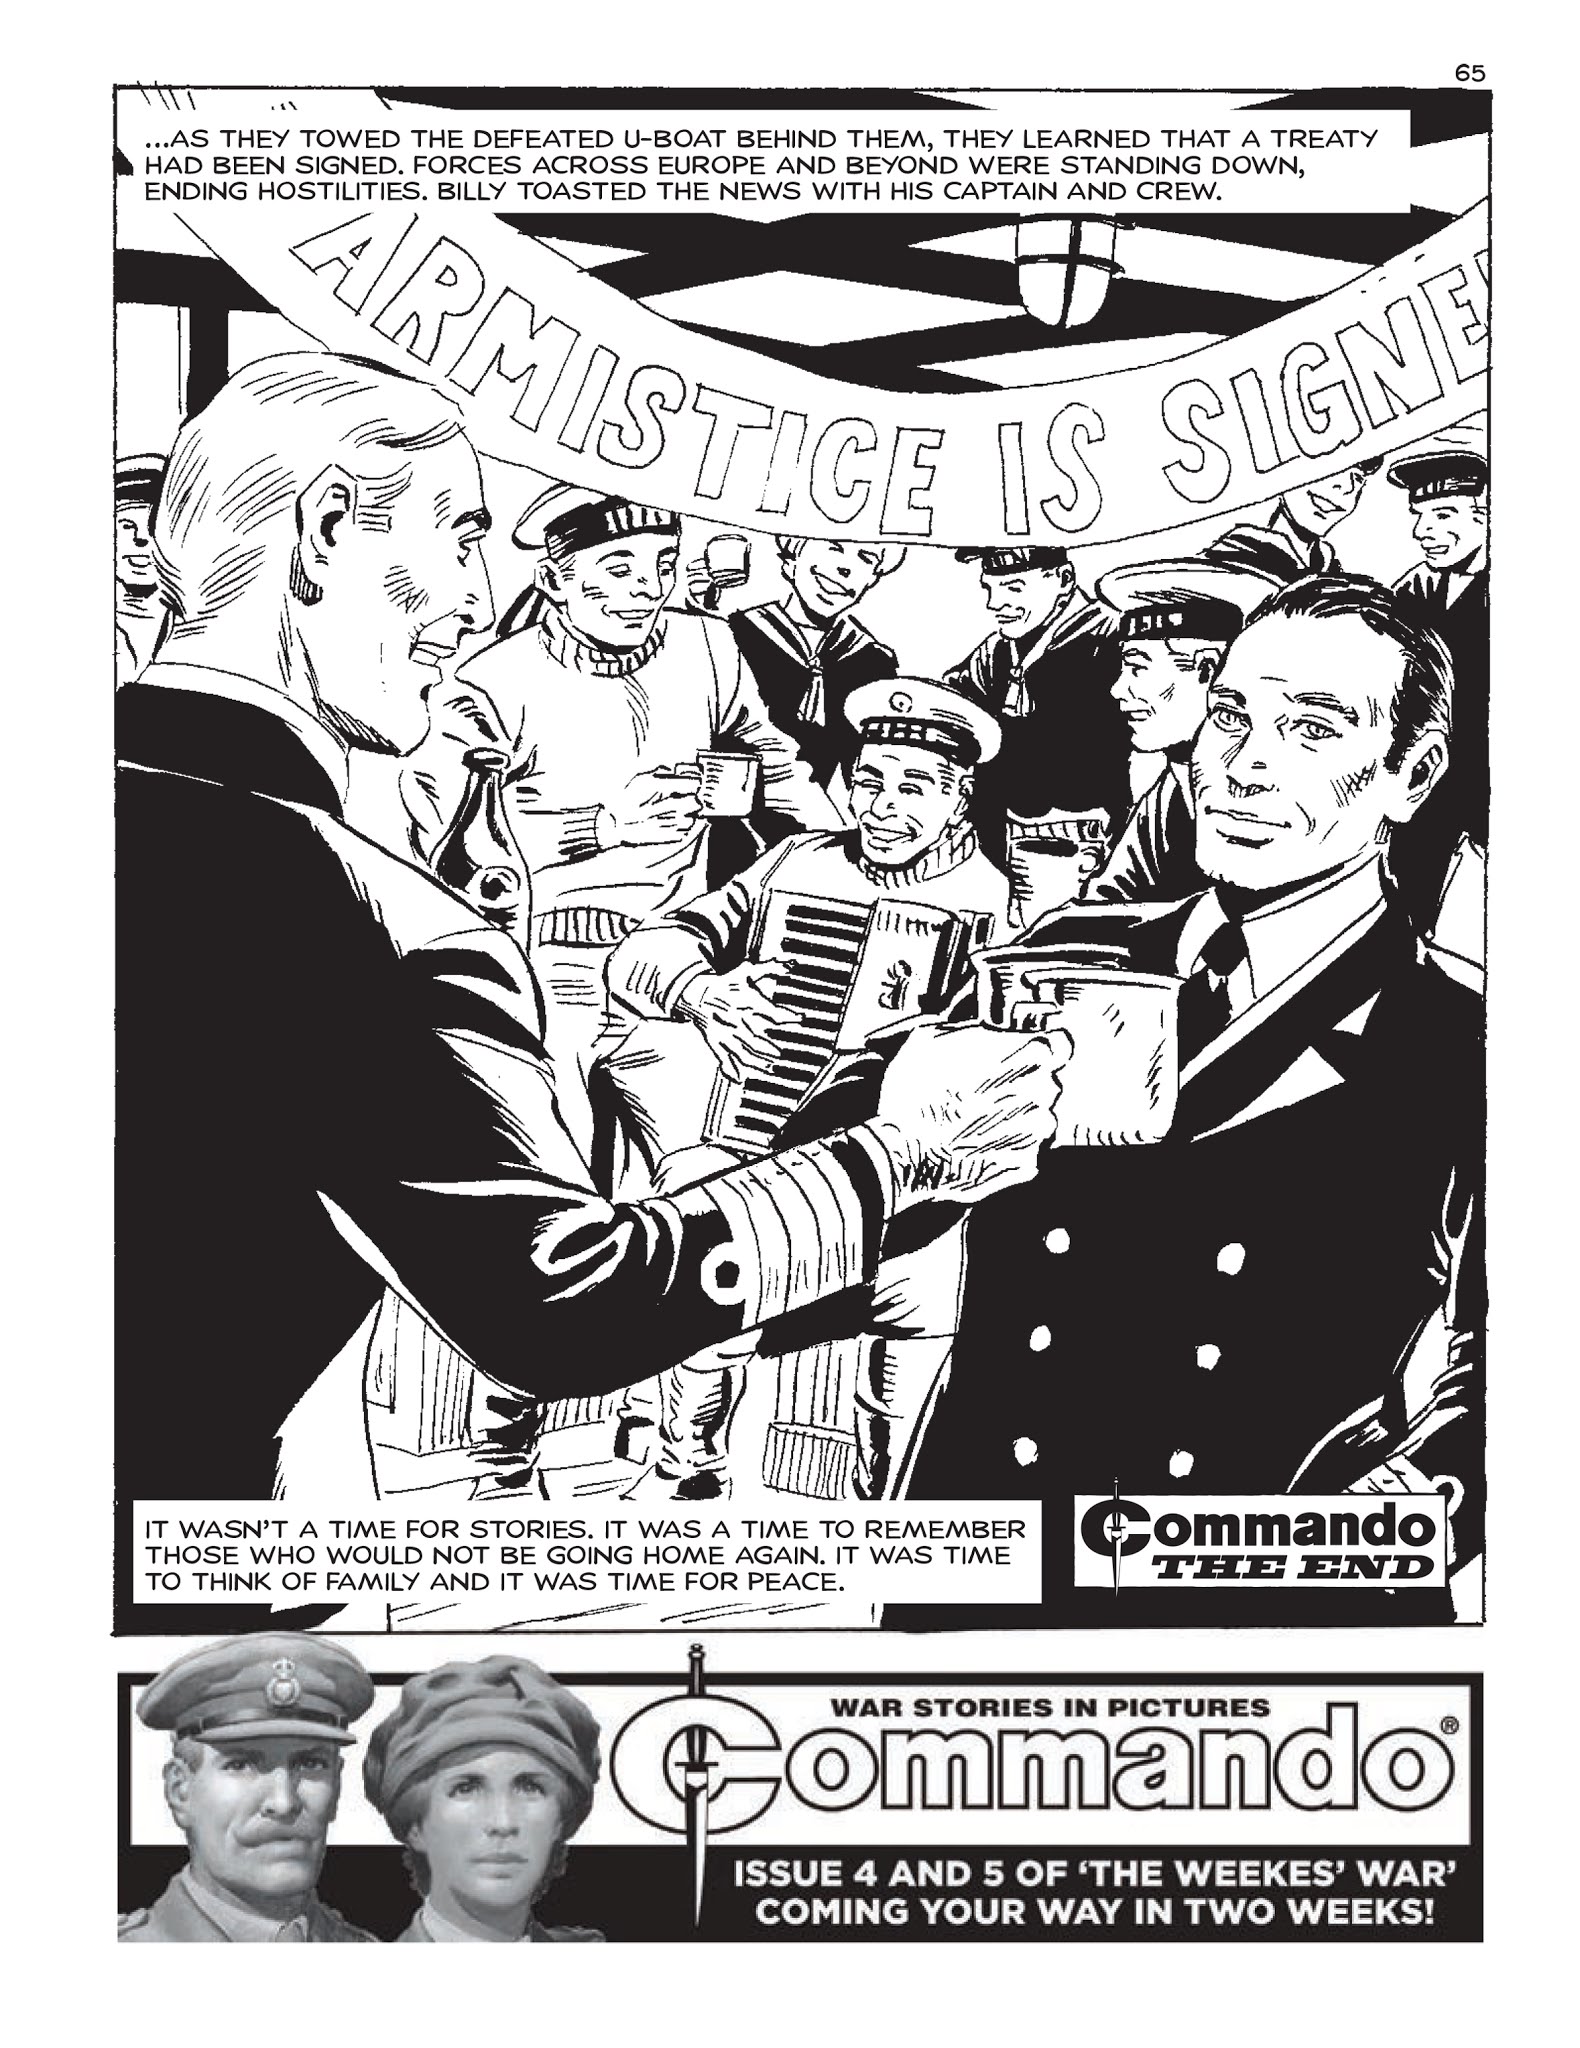 Read online Commando: For Action and Adventure comic -  Issue #5177 - 64